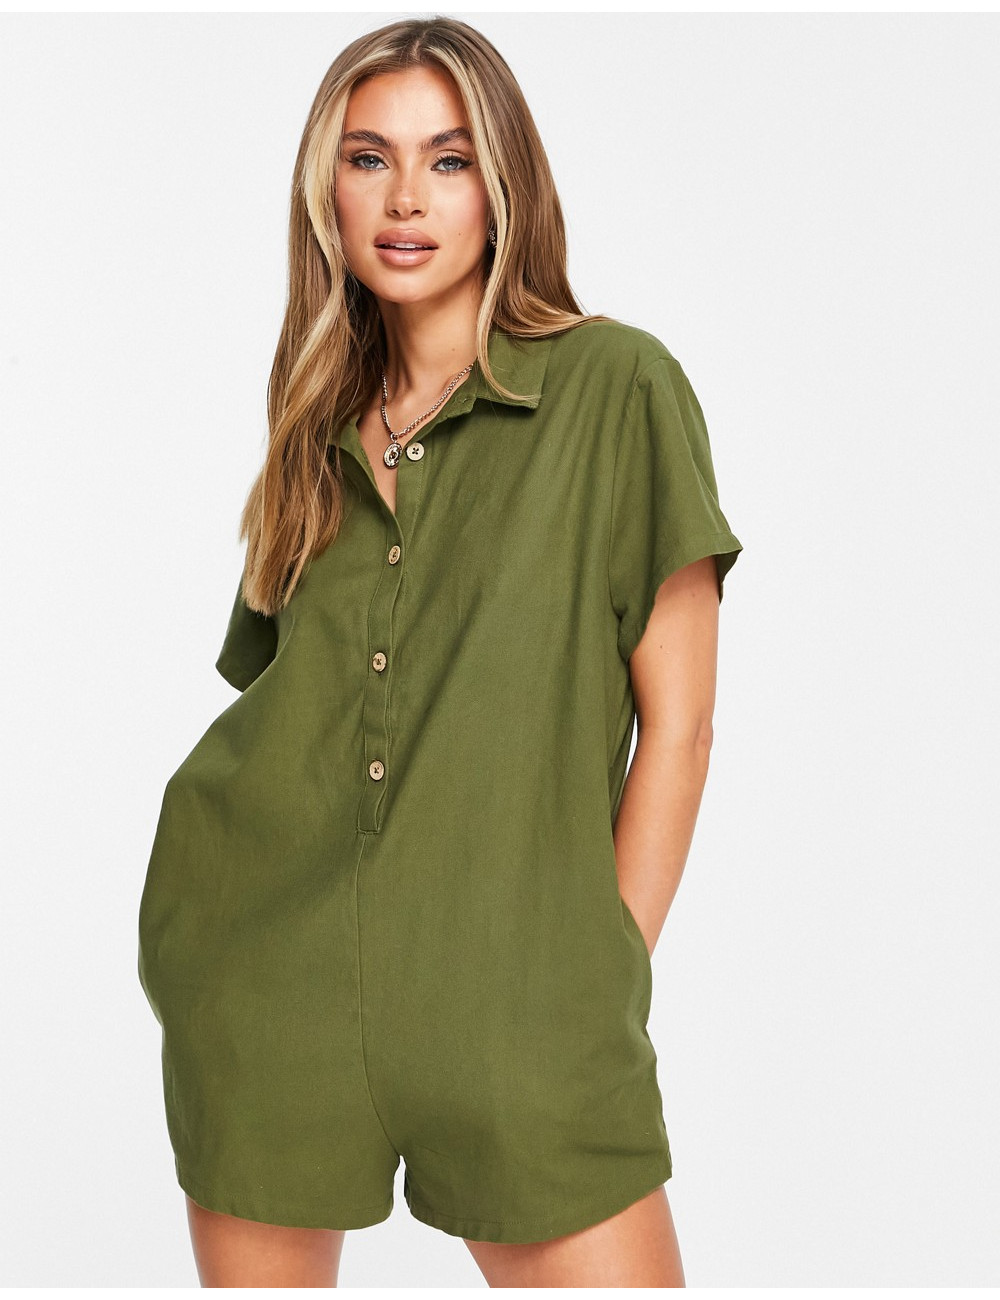 RVCA Go Green playsuit in...